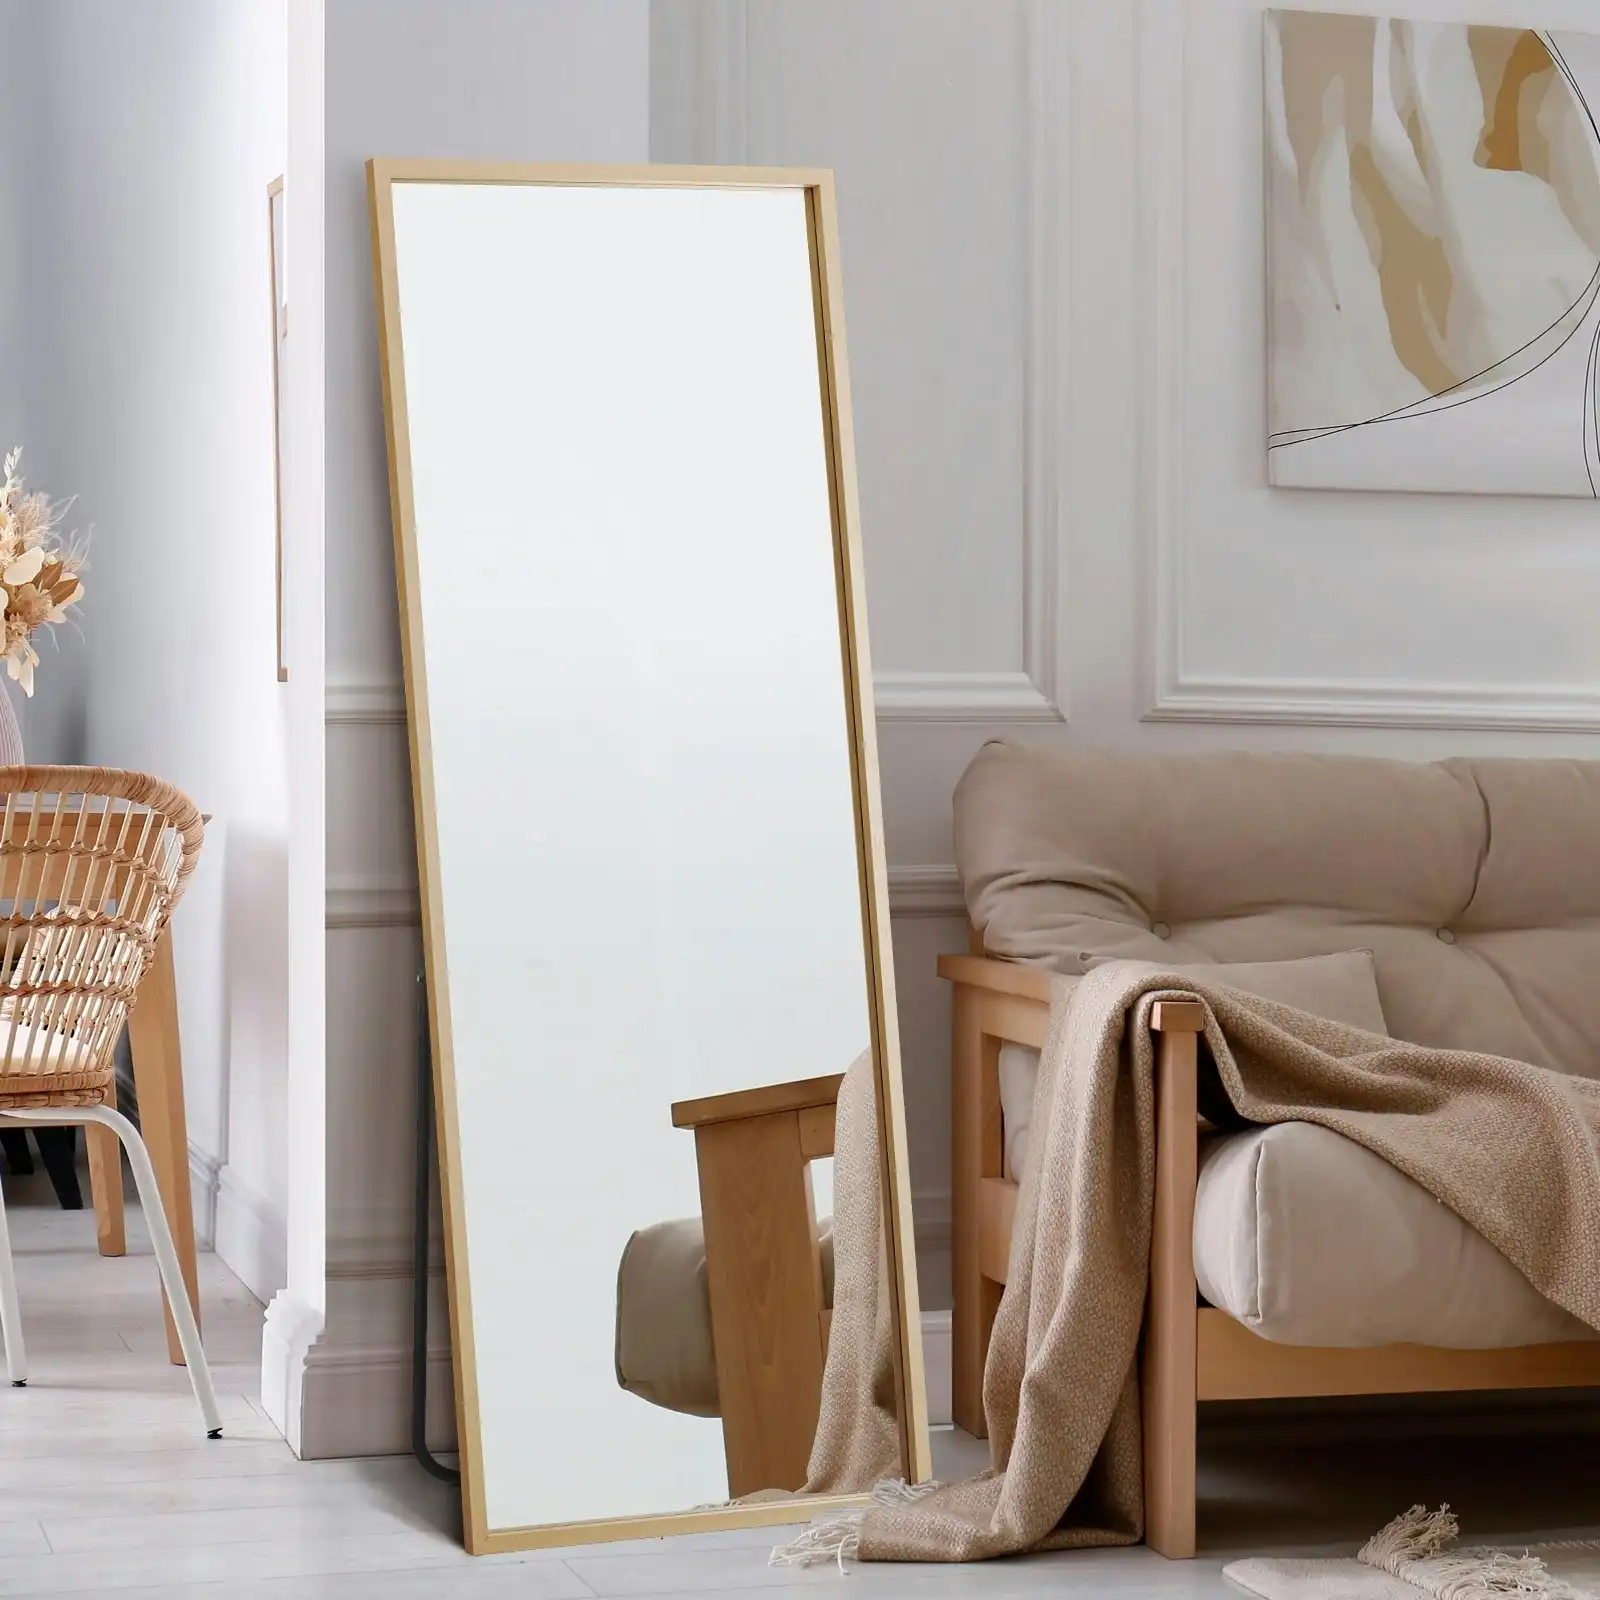 Oikiture Wooden 166x60cm Full Length Mirror Rectangle Floor Mirrors Free Standing